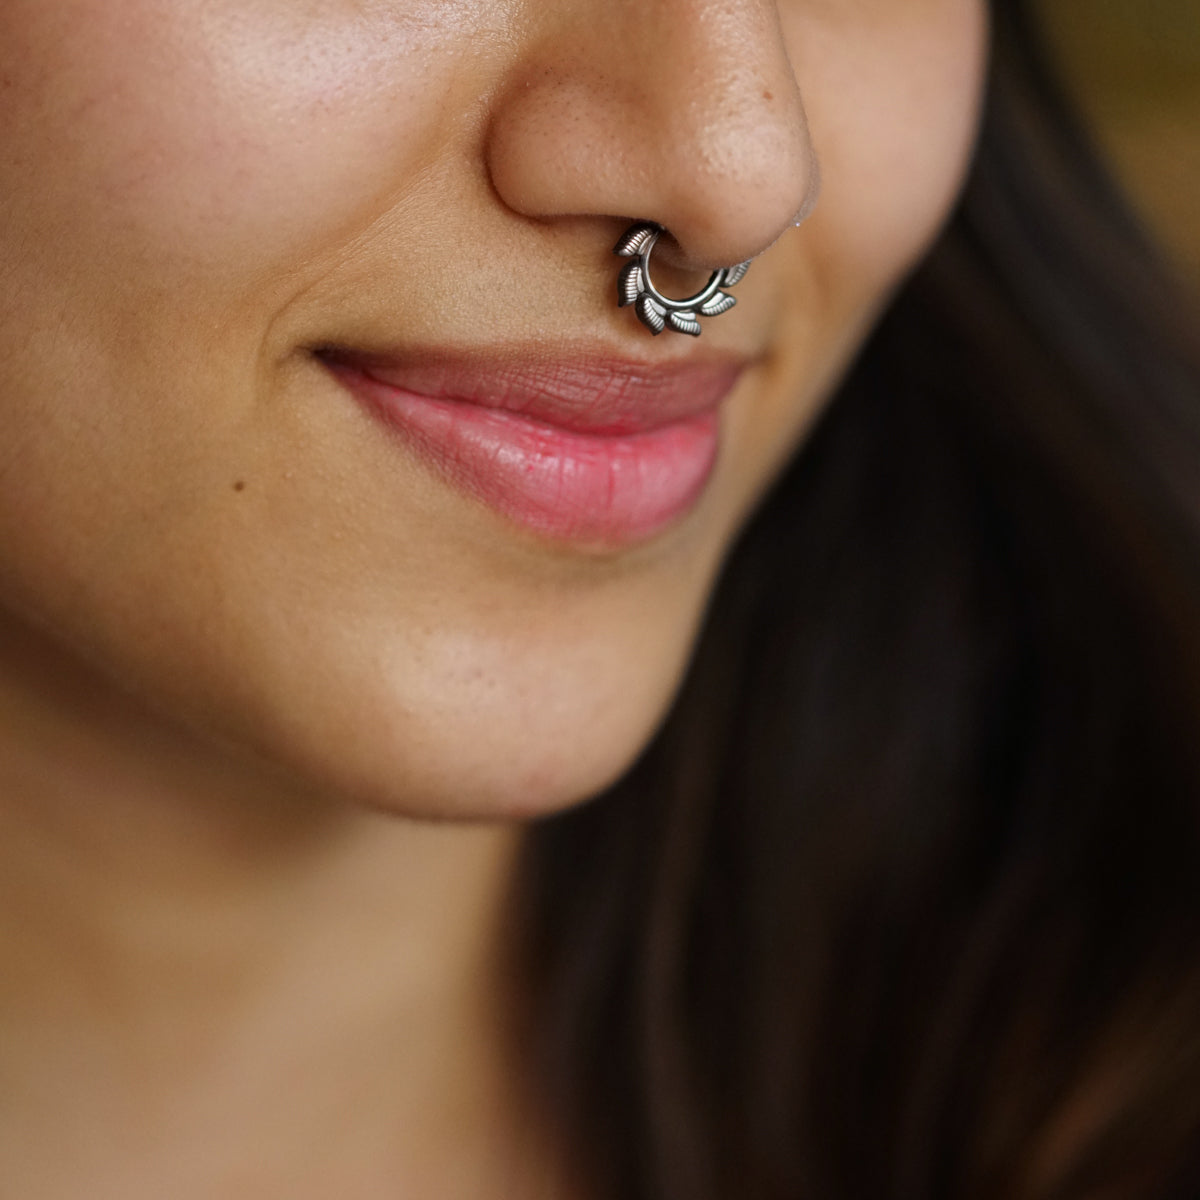 Buy 925 Silver Tribal Septum Ring For Pierced Nose. Nose Jewelry at  Amazon.in